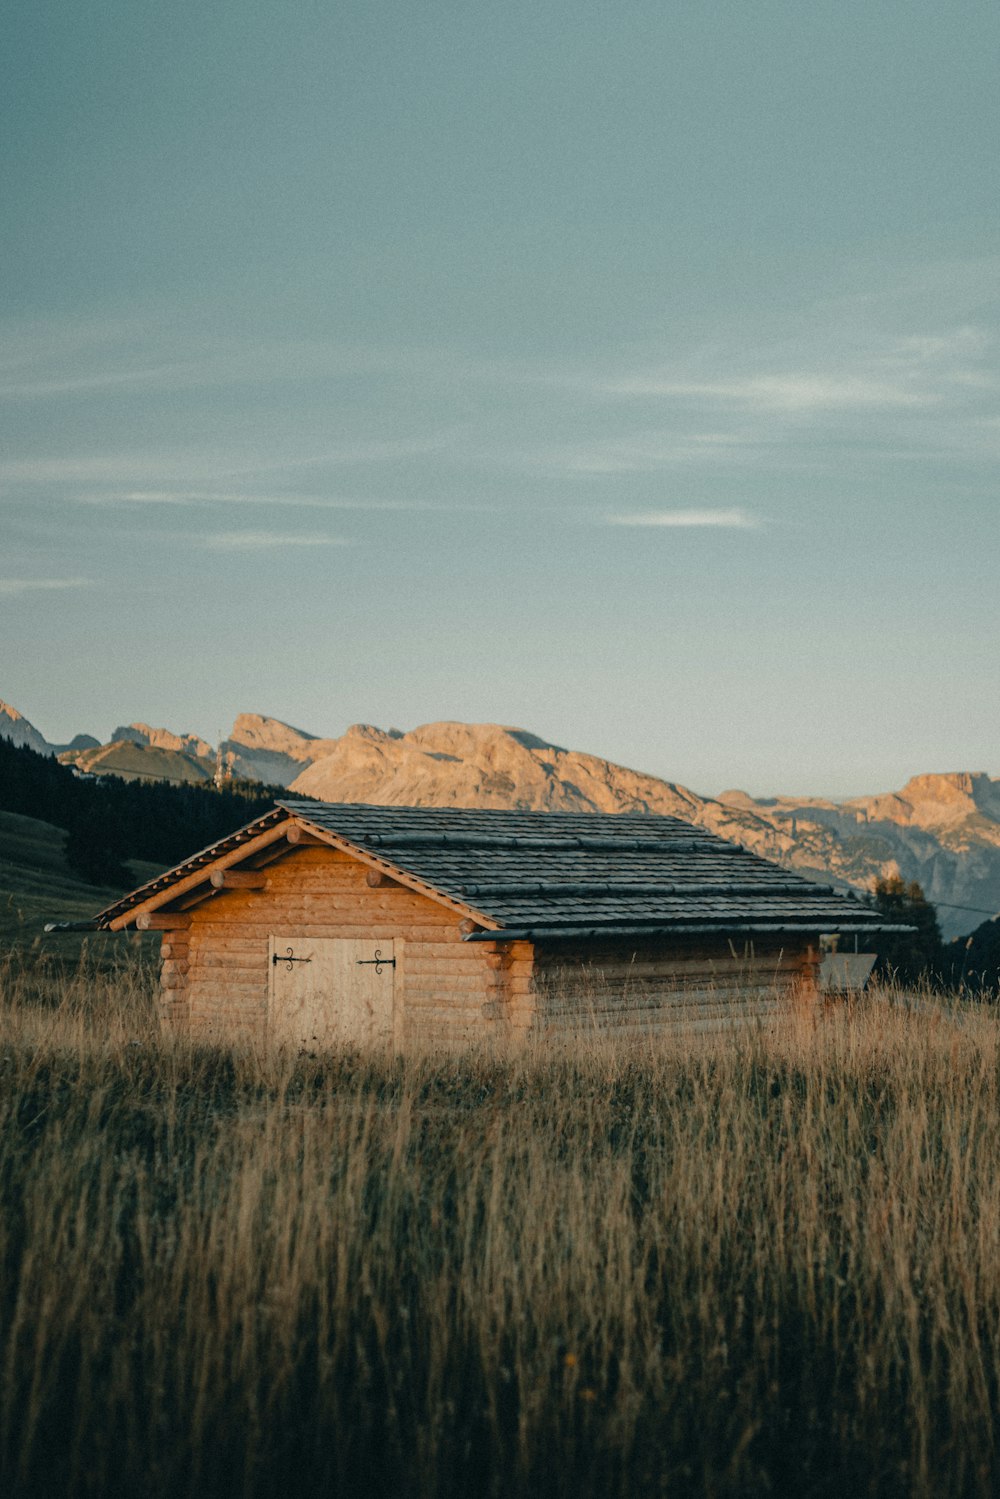 a wooden cabin in a field with mountains in the background